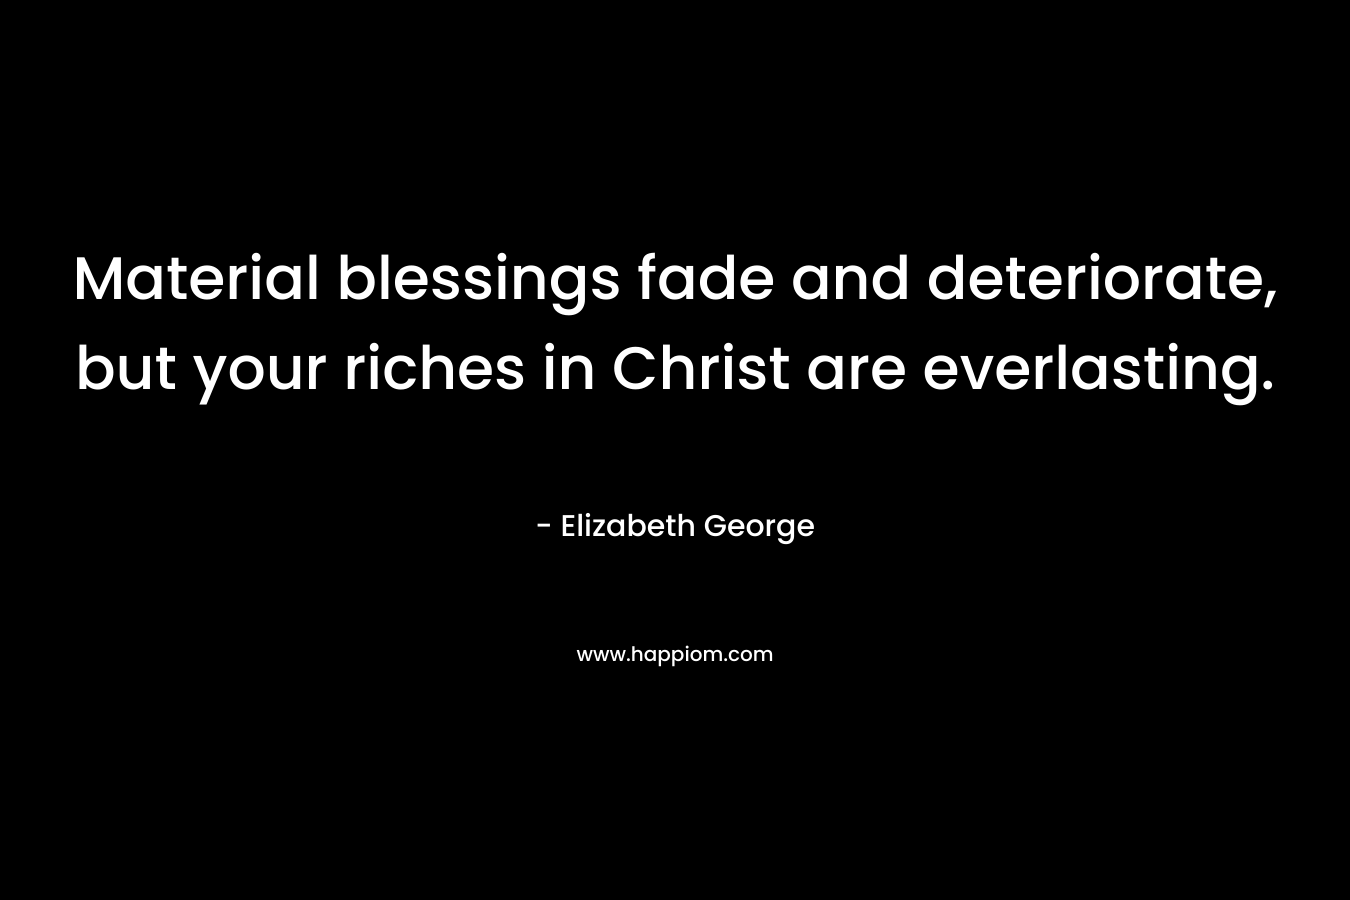 Material blessings fade and deteriorate, but your riches in Christ are everlasting. – Elizabeth George